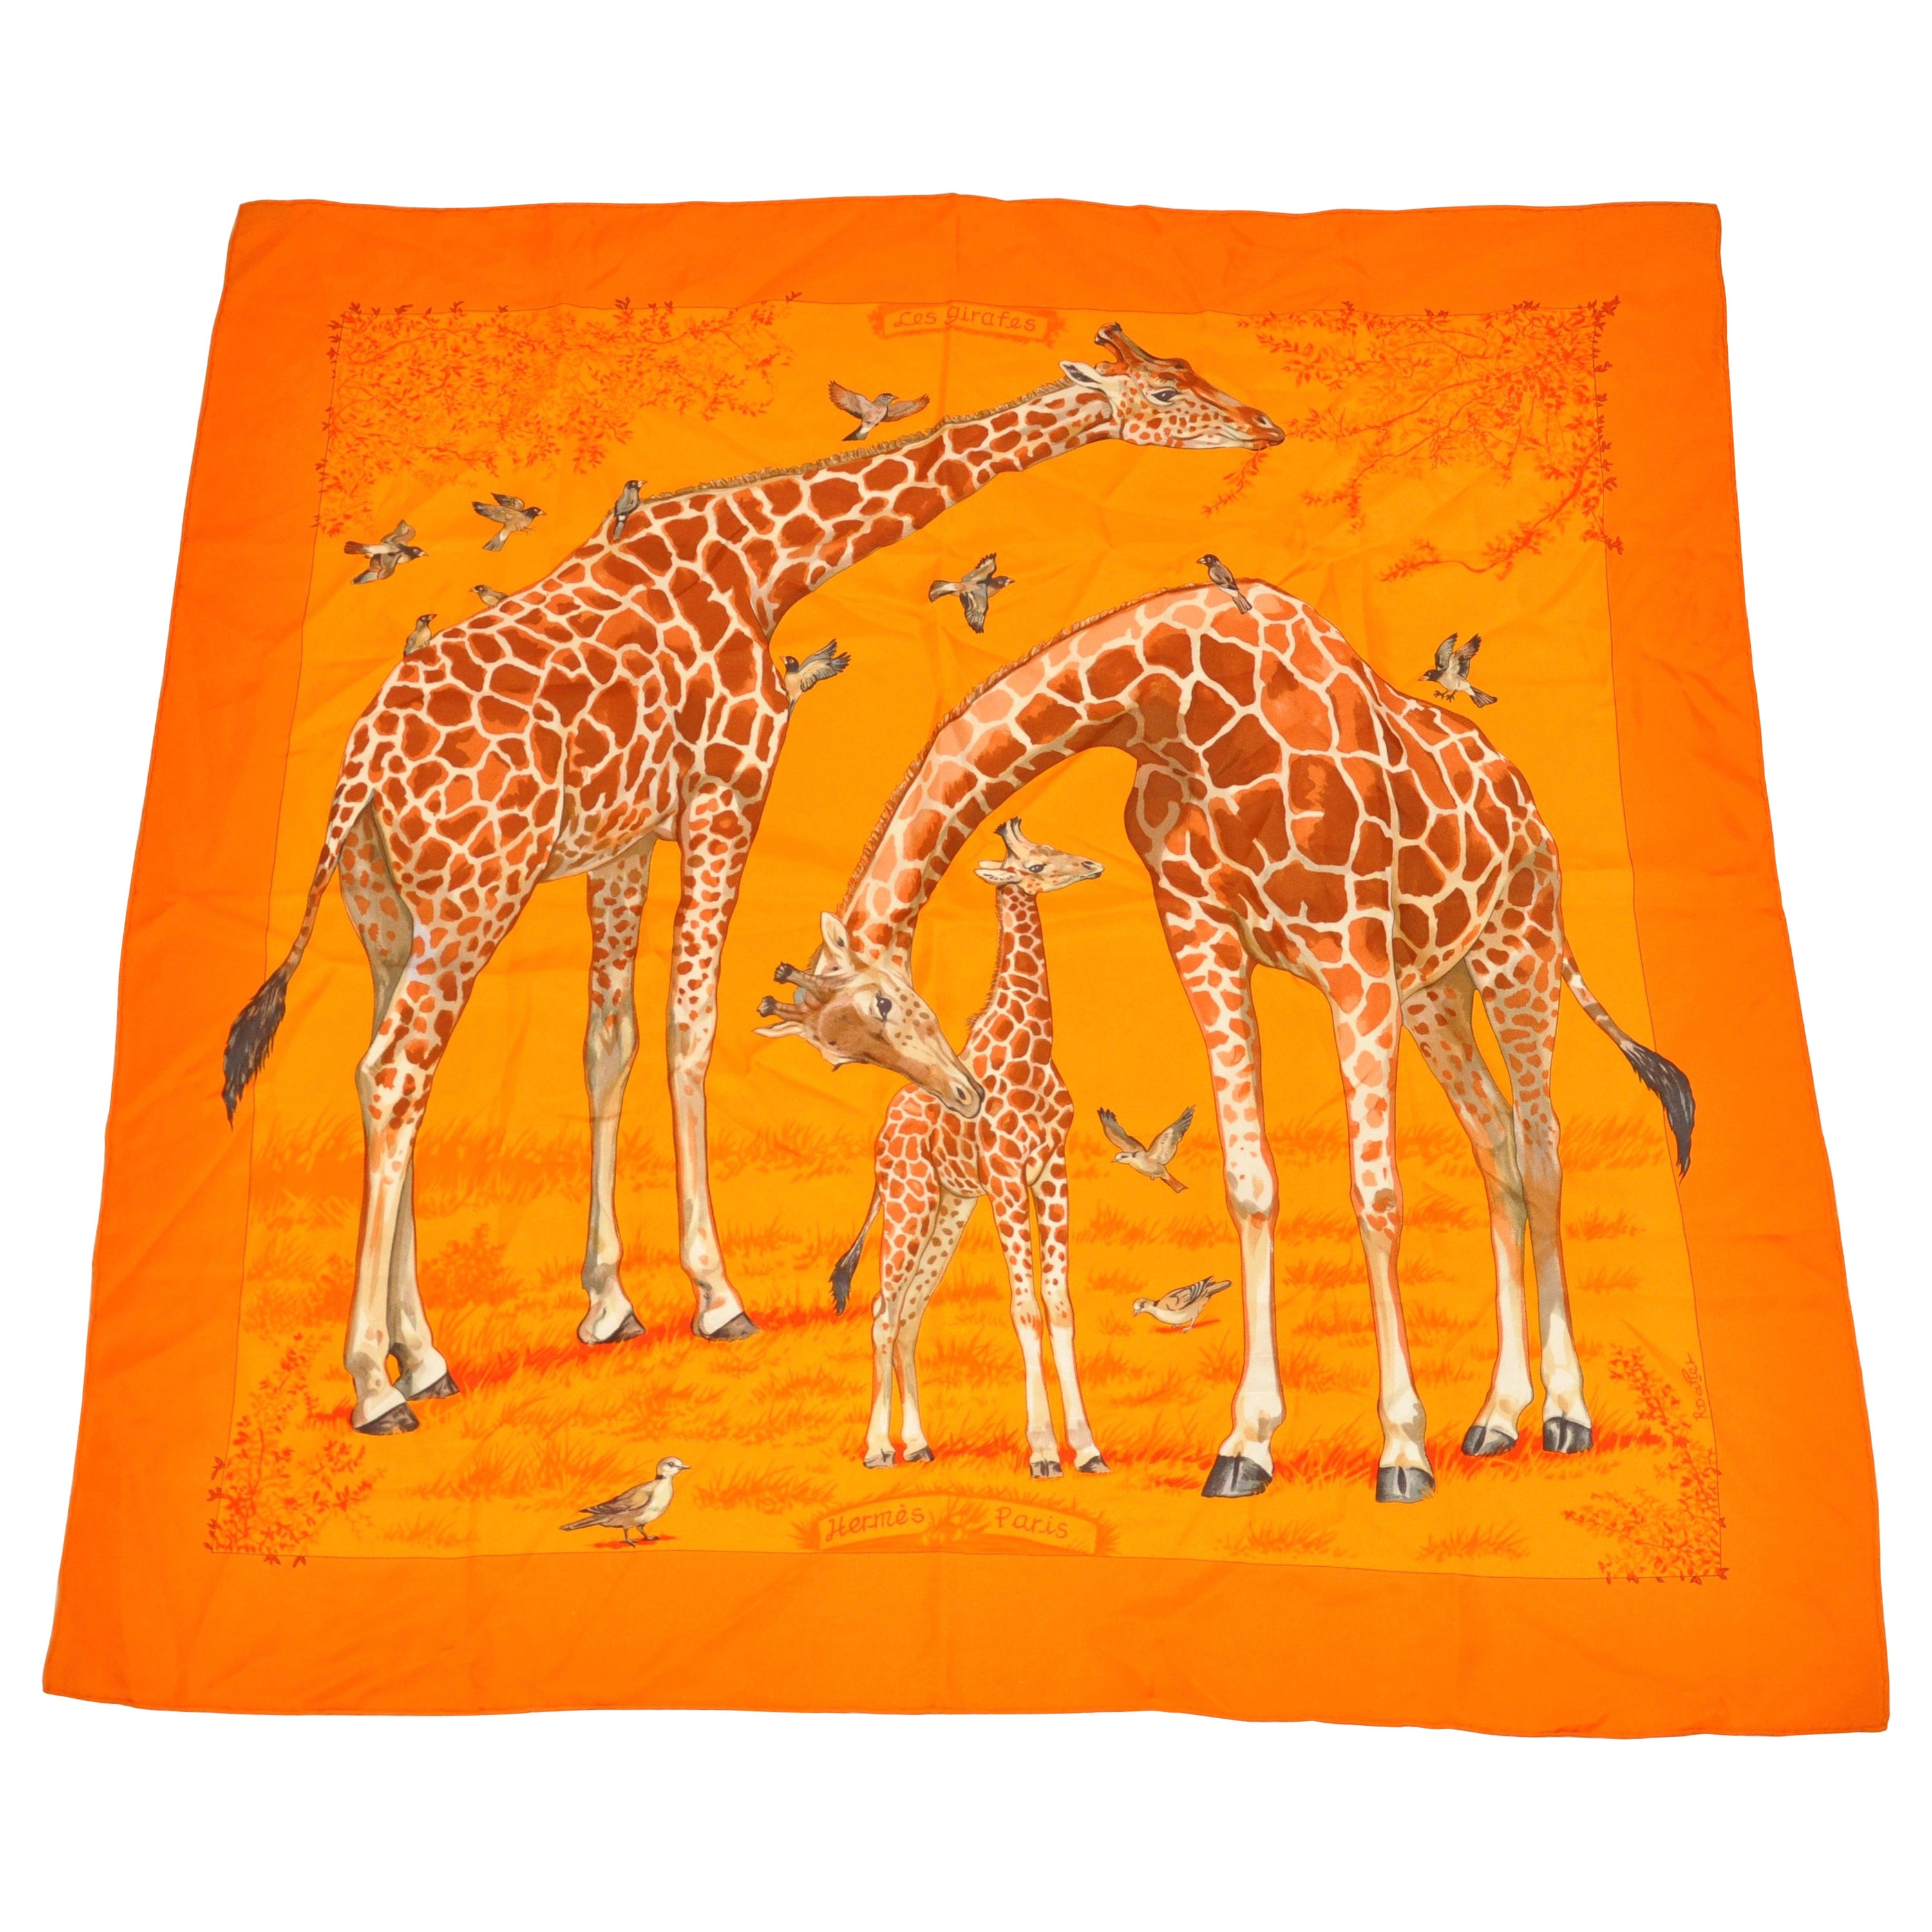 Hermes Rare "Limited Edition" "Les Girafes" by R. Datter Silk Jacquard Scarf